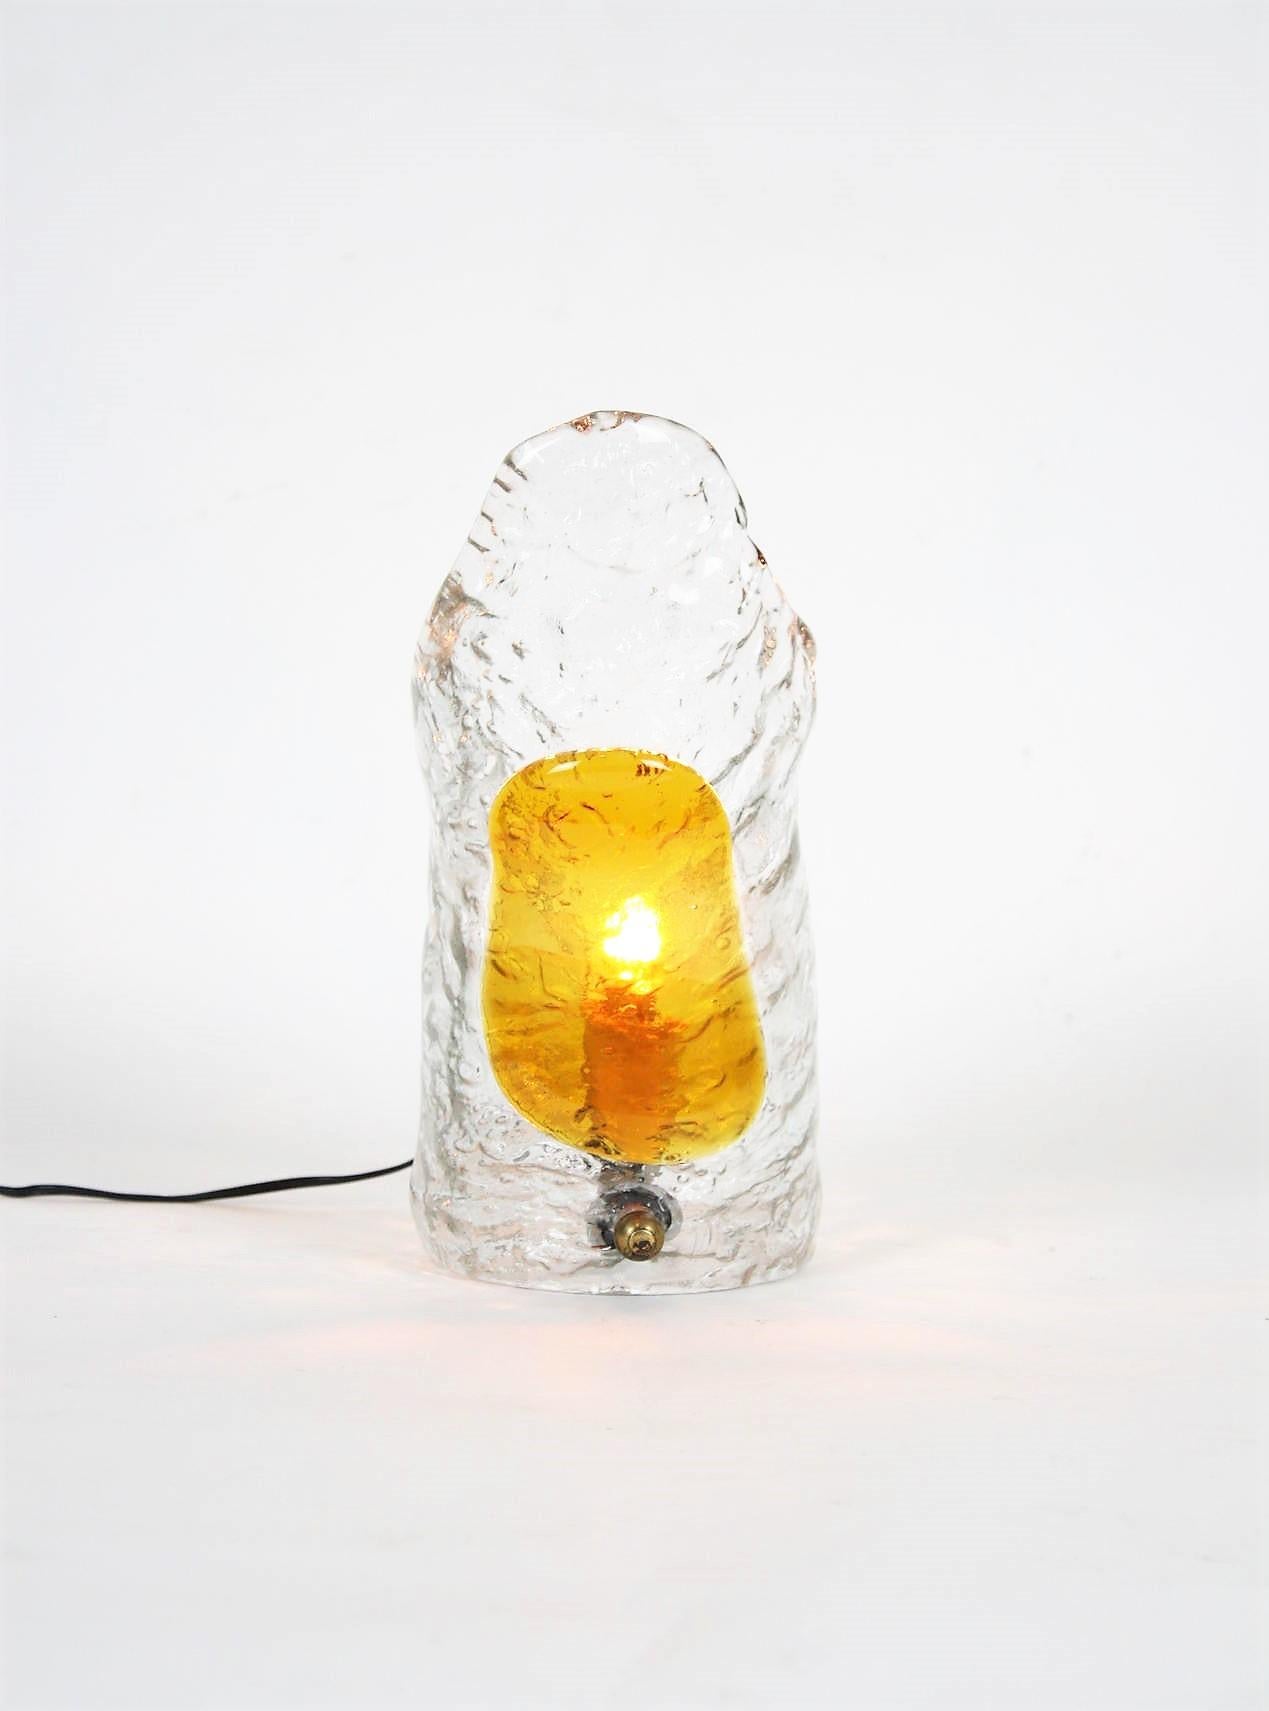 Hand blown Murano glass table lamp manufactured by Mazzega, Italy, 1960s.
Amber and Clear textured glass.
This beautiful lamp features an standing up shade with amber glass applied to clear textured glass. It has a brass ball finial as decorative